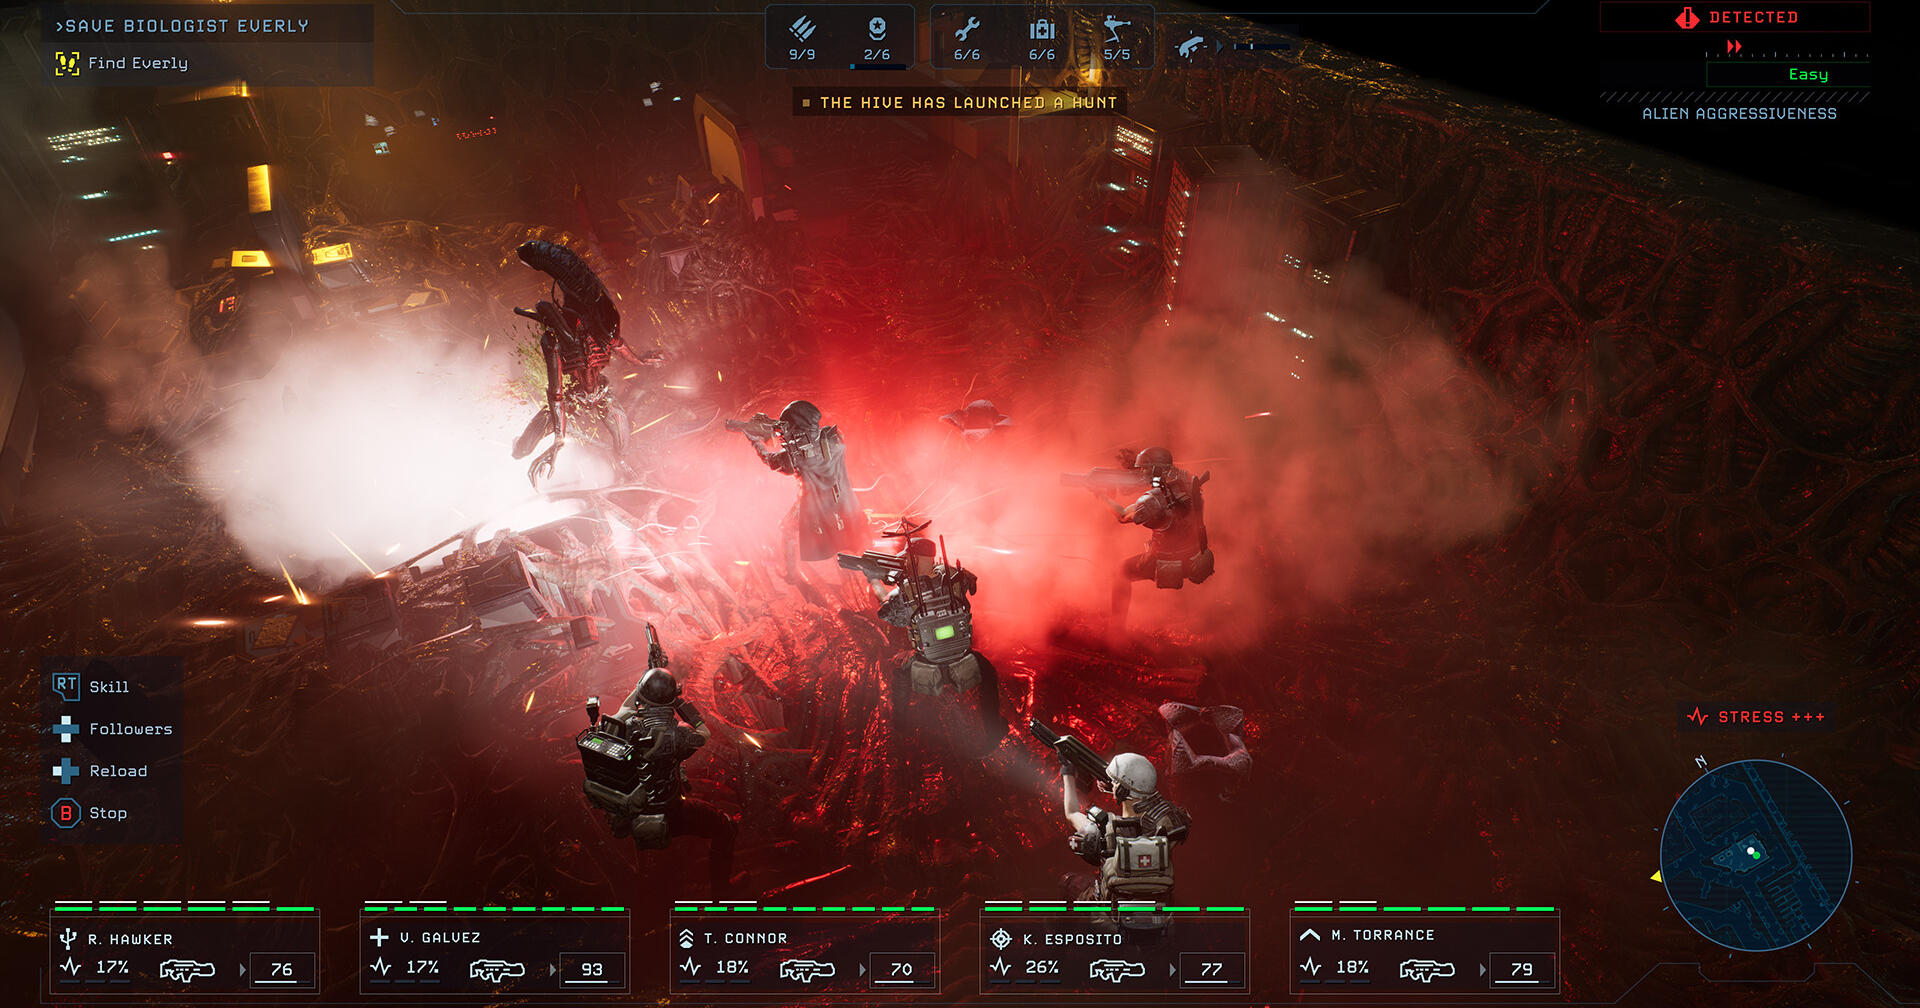 We see Aliens Dark Descent gameplay with the the five-person squad aiming at a xenomorph in a cloud of red mist.